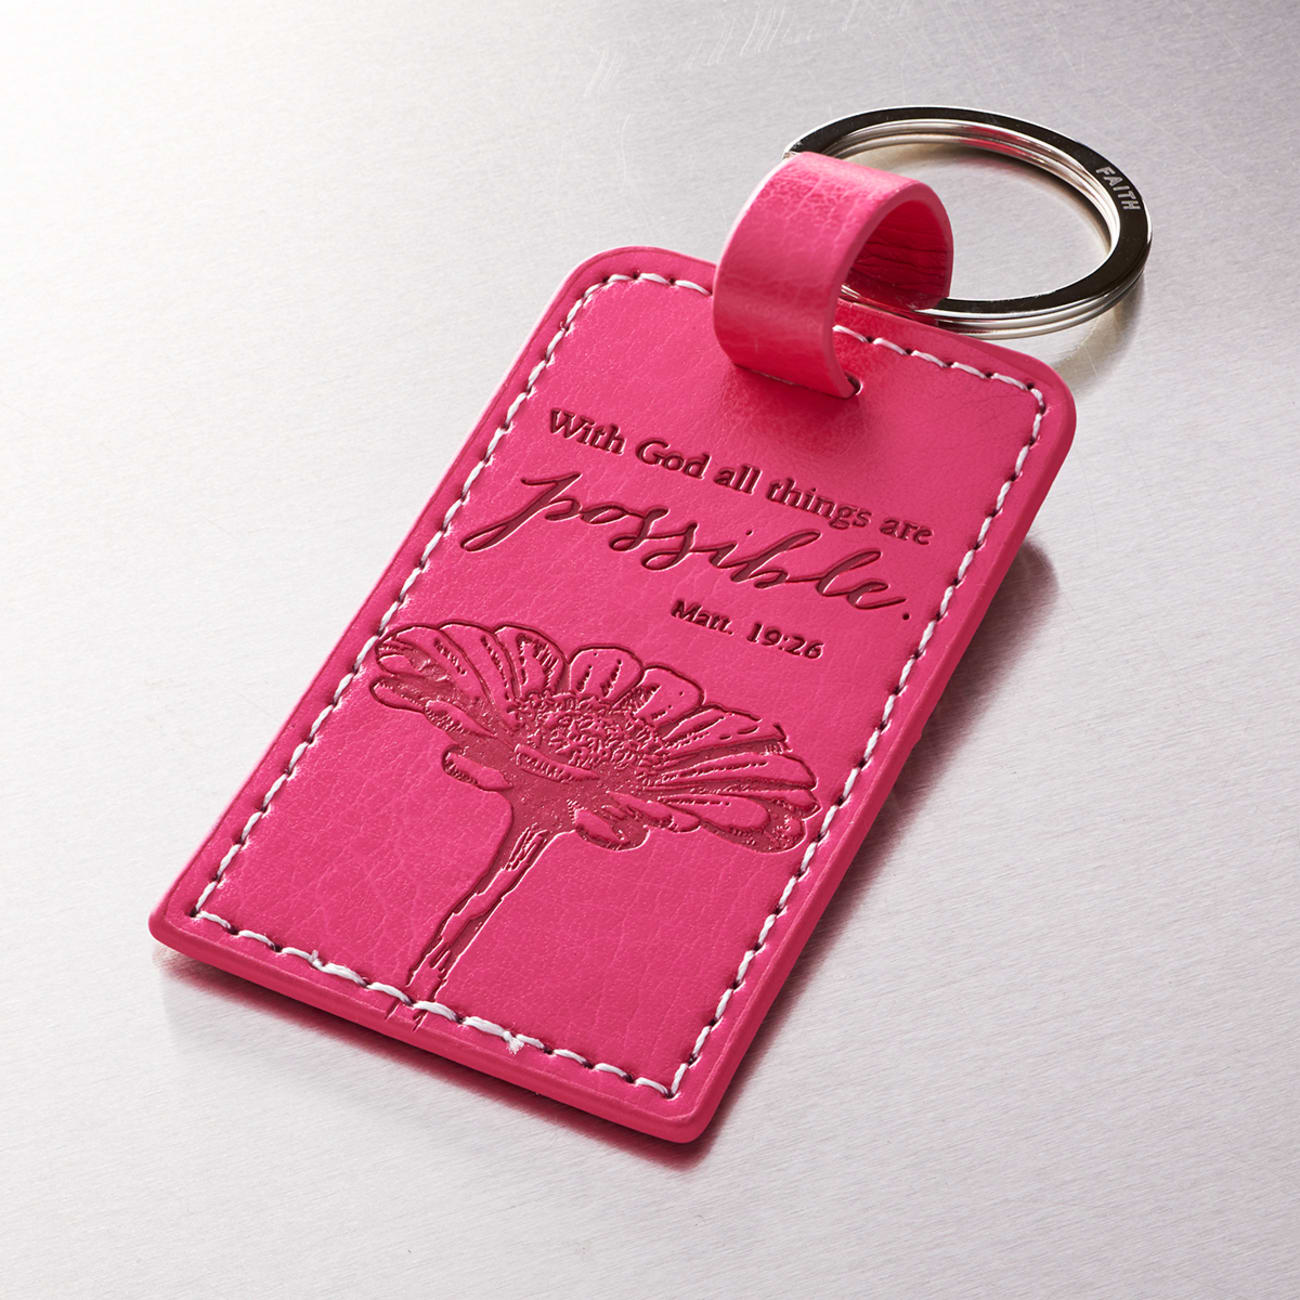 Luxleather Keyring: With God All Things Are Possible Pink Jewellery